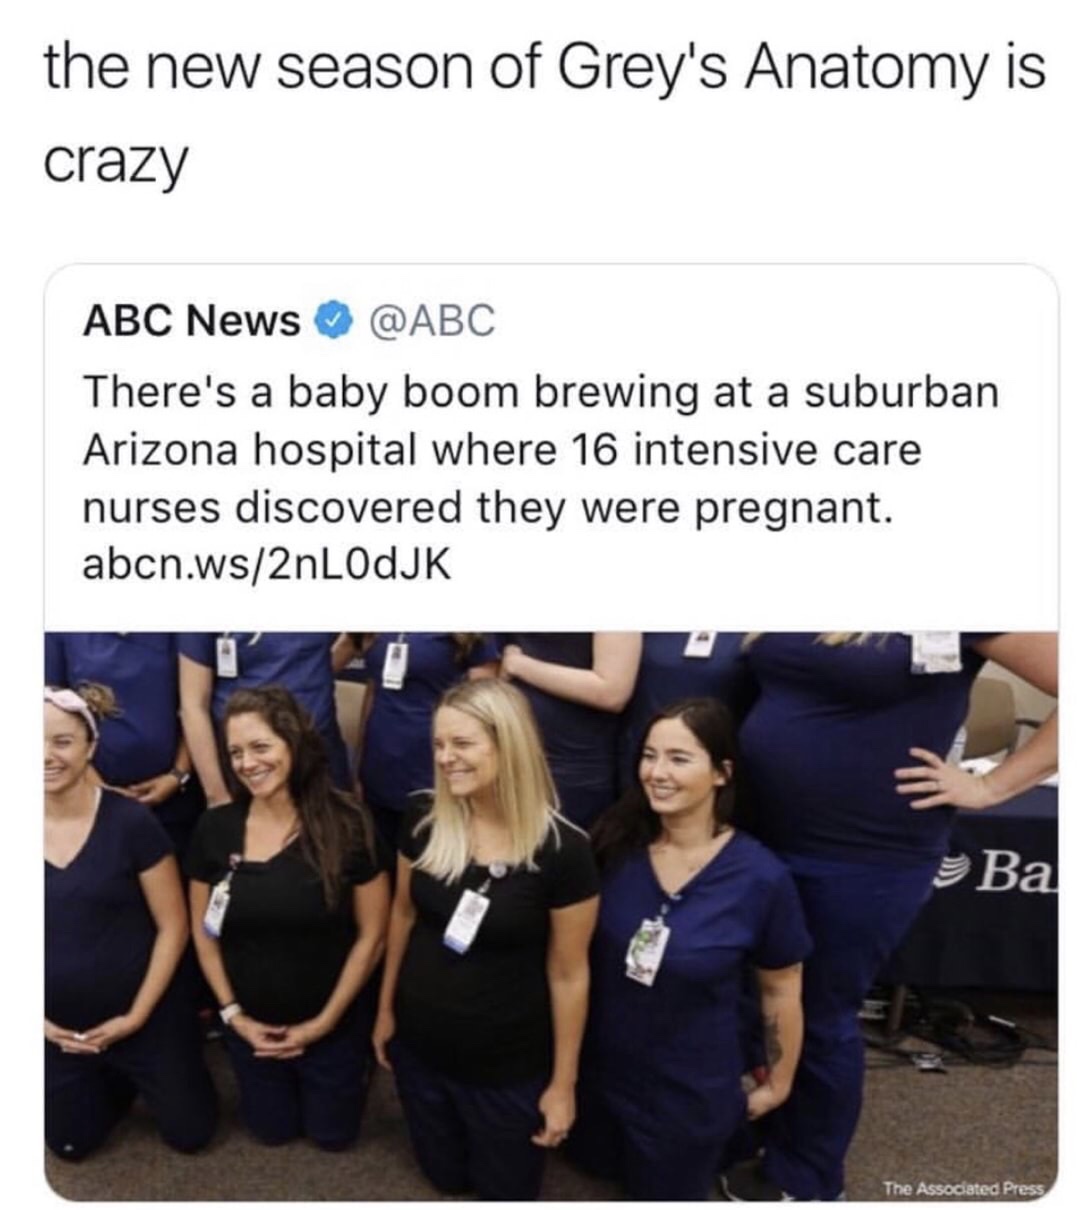 memes - 16 nurses pregnant - the new season of Grey's Anatomy is crazy Abc News There's a baby boom brewing at a suburban Arizona hospital where 16 intensive care nurses discovered they were pregnant. abcn.ws2nLOdJK Ba The Associated Press